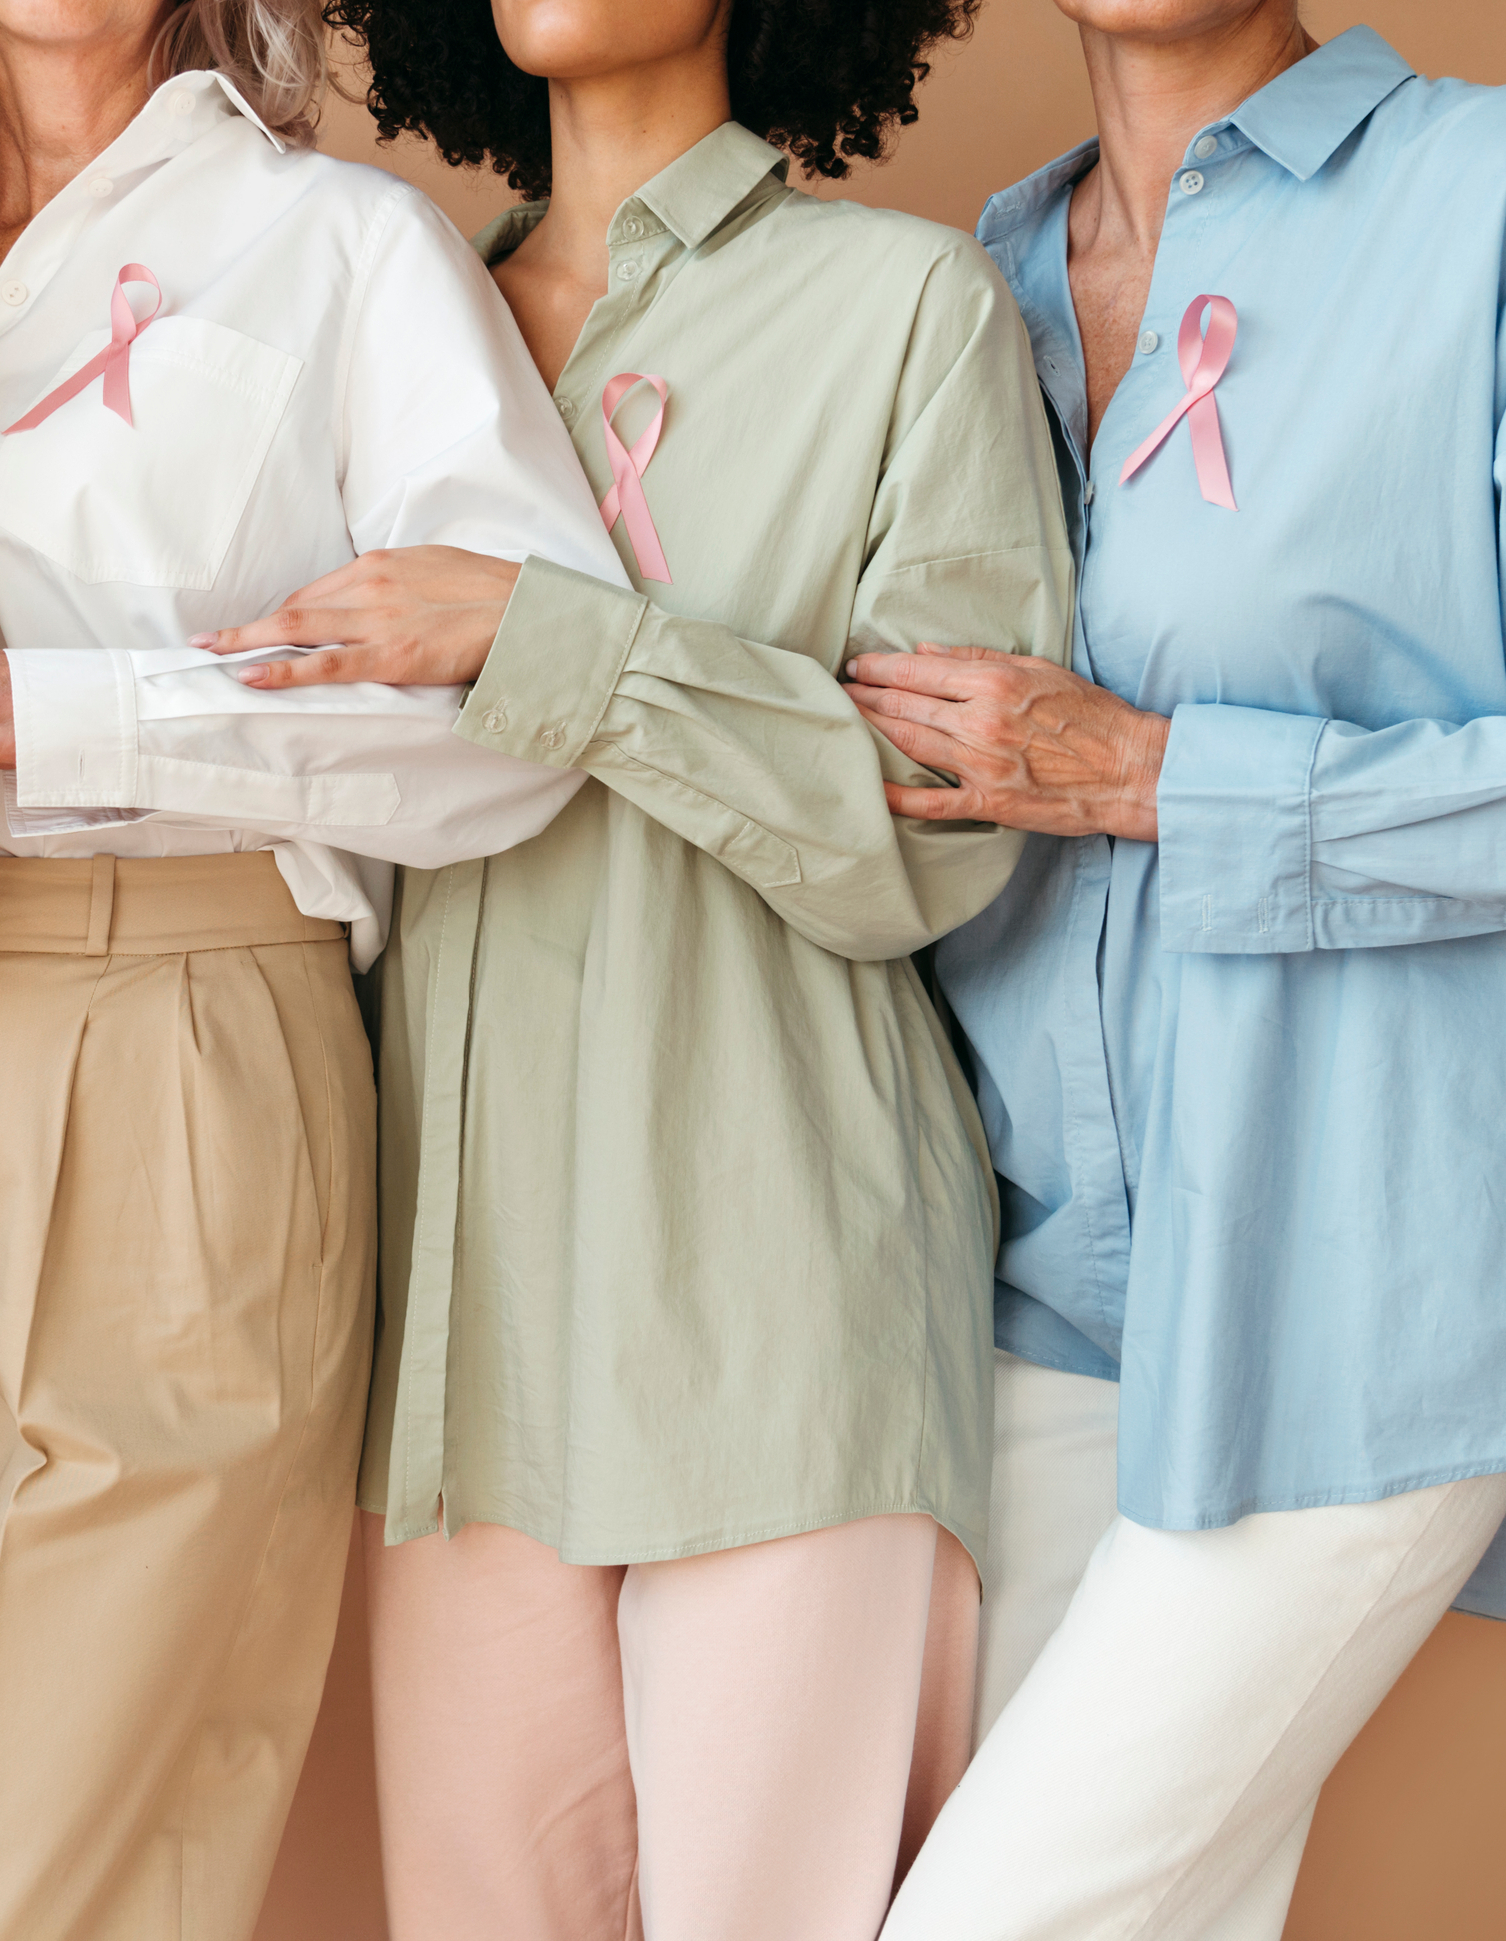 women with pink ribbon